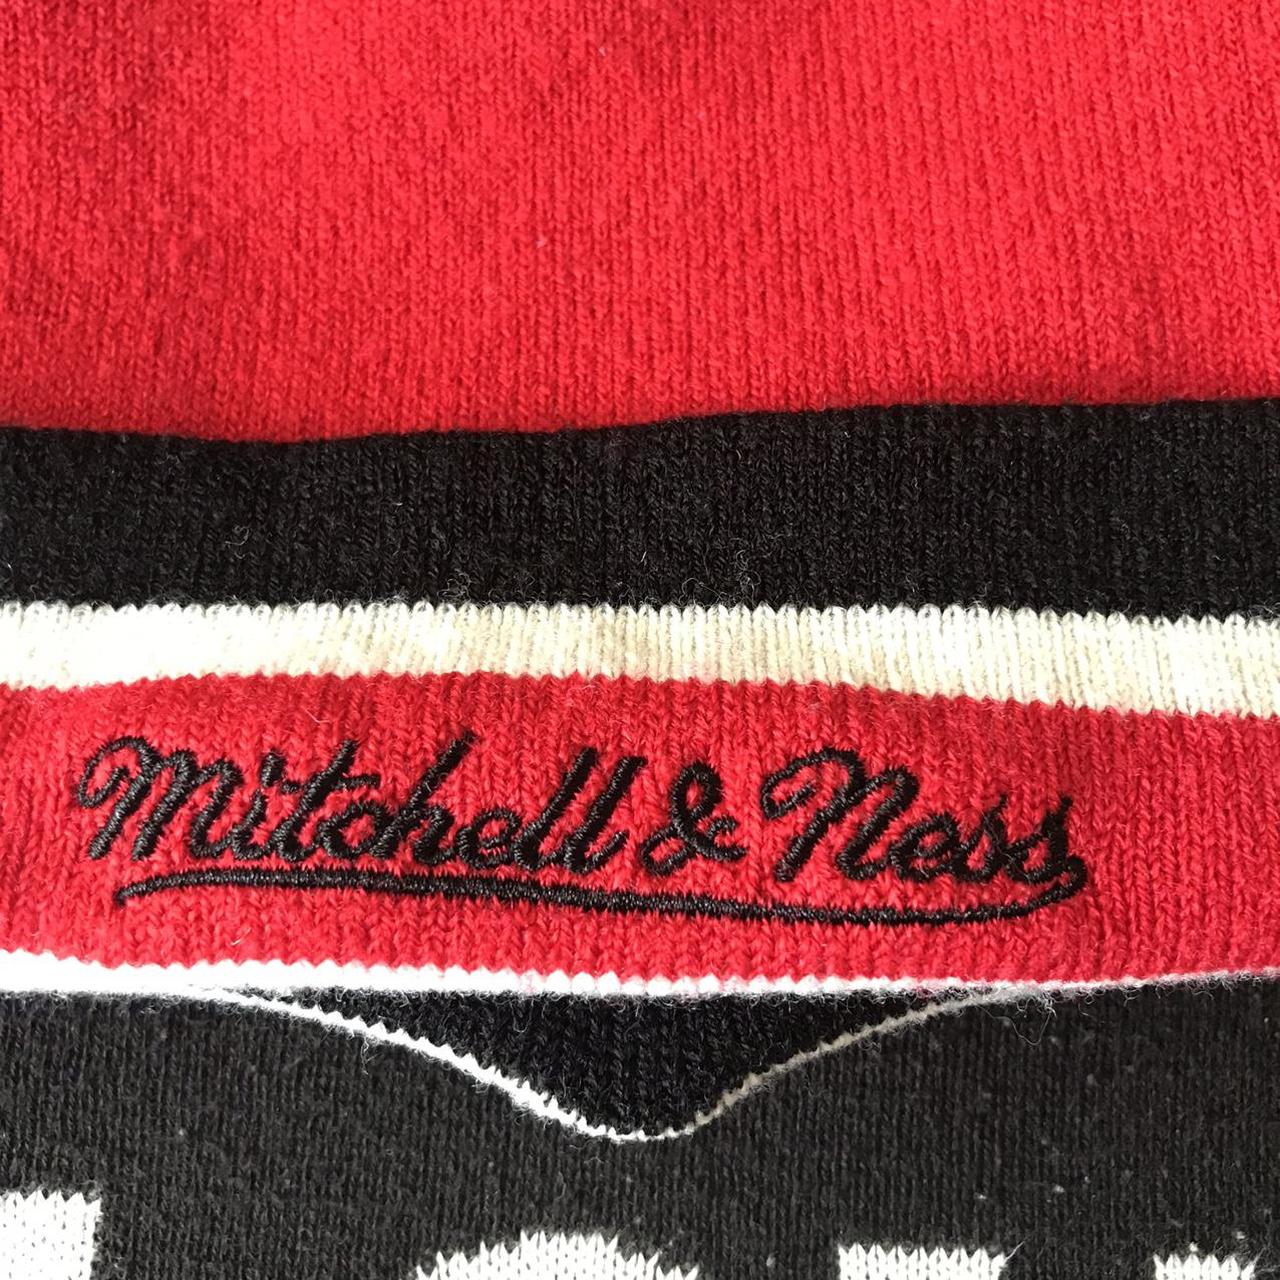 Mitchell & Ness Men's Red and Black Hat (4)